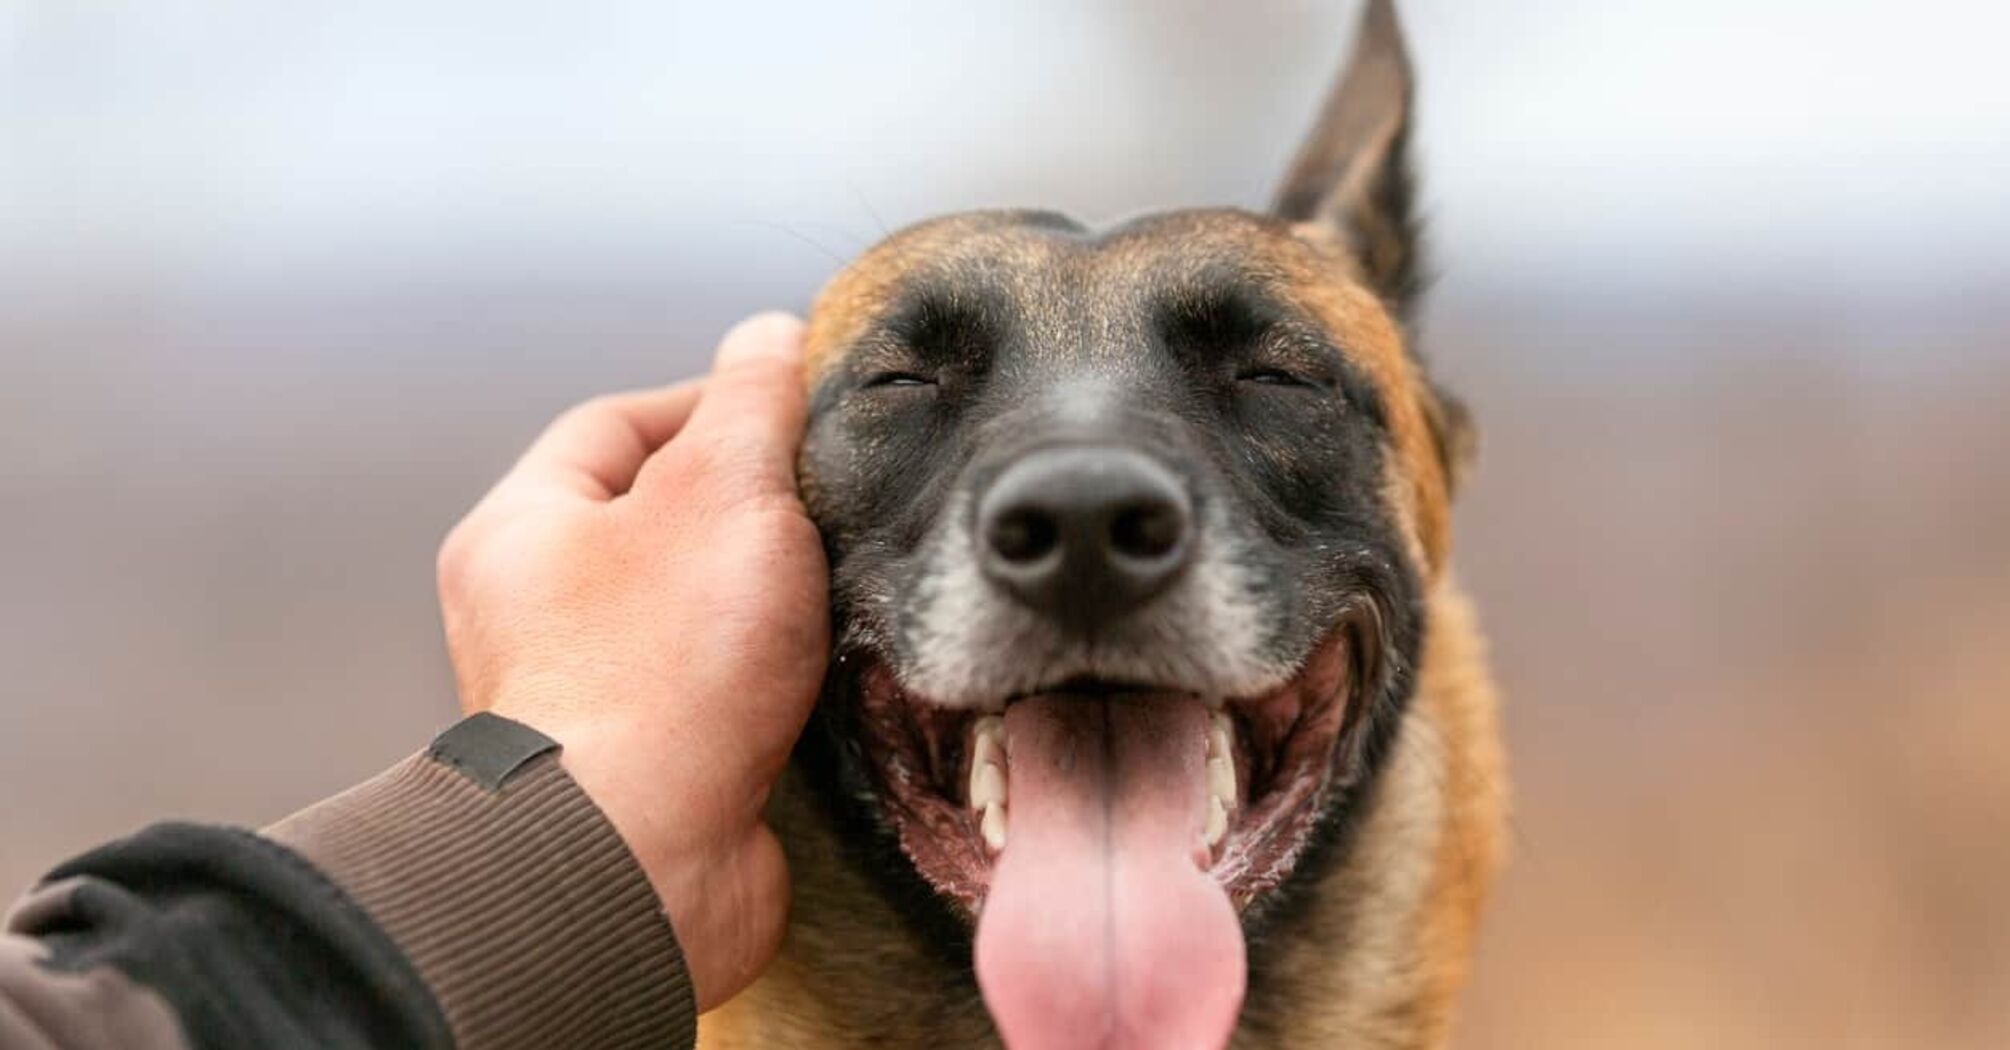 How to understand that a dog loves and understands you